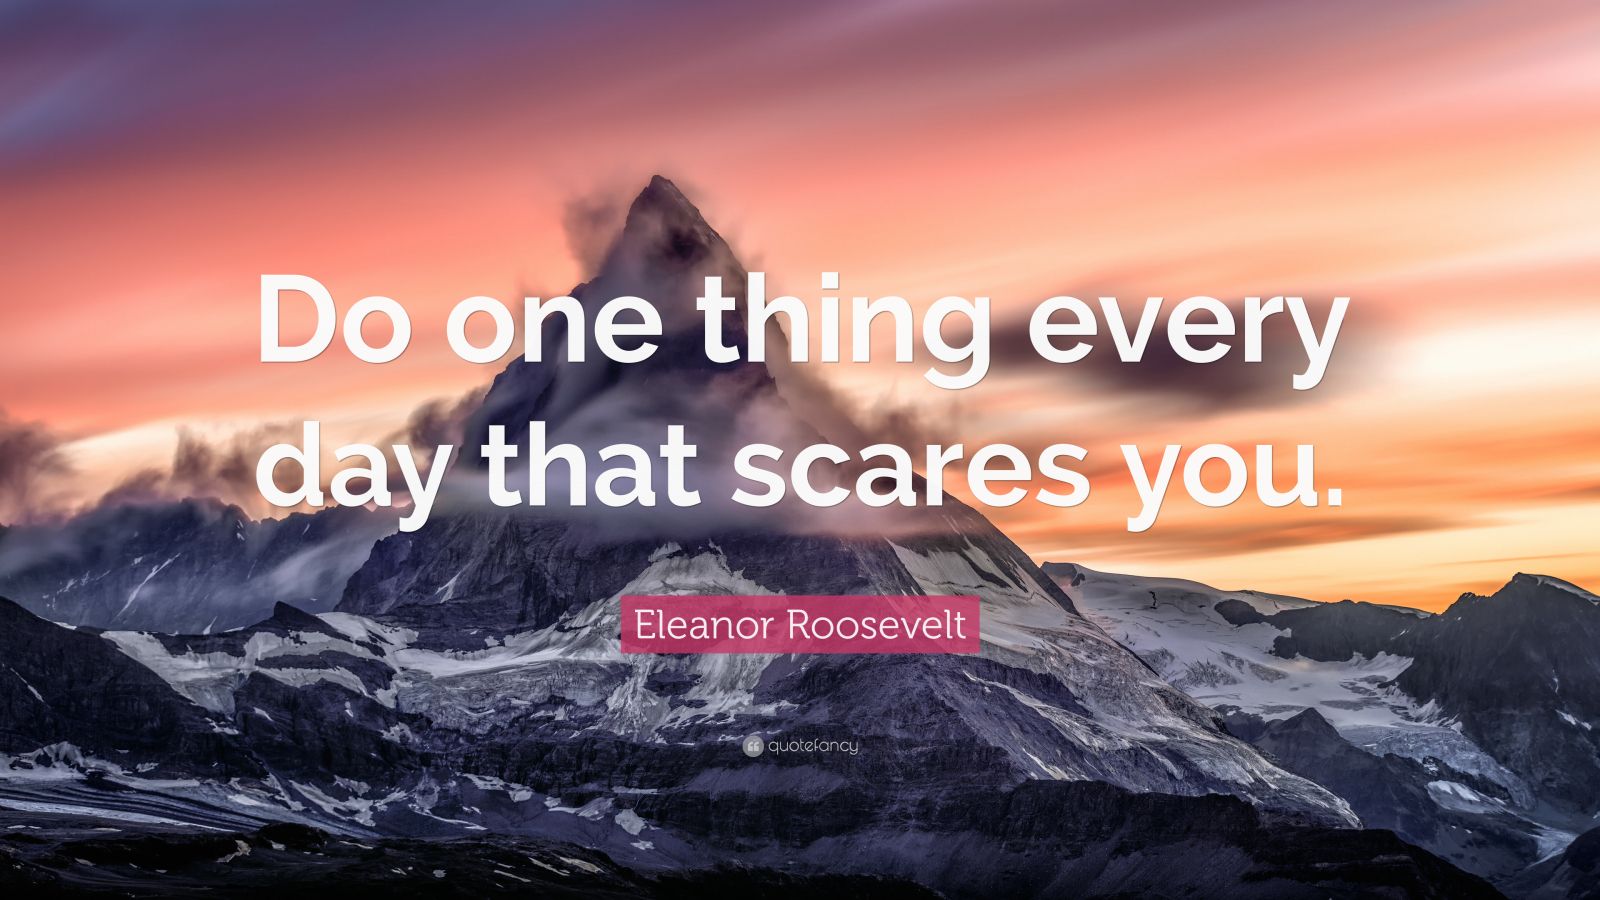 Eleanor Roosevelt Quote: “Do one thing every day that scares you.” (23